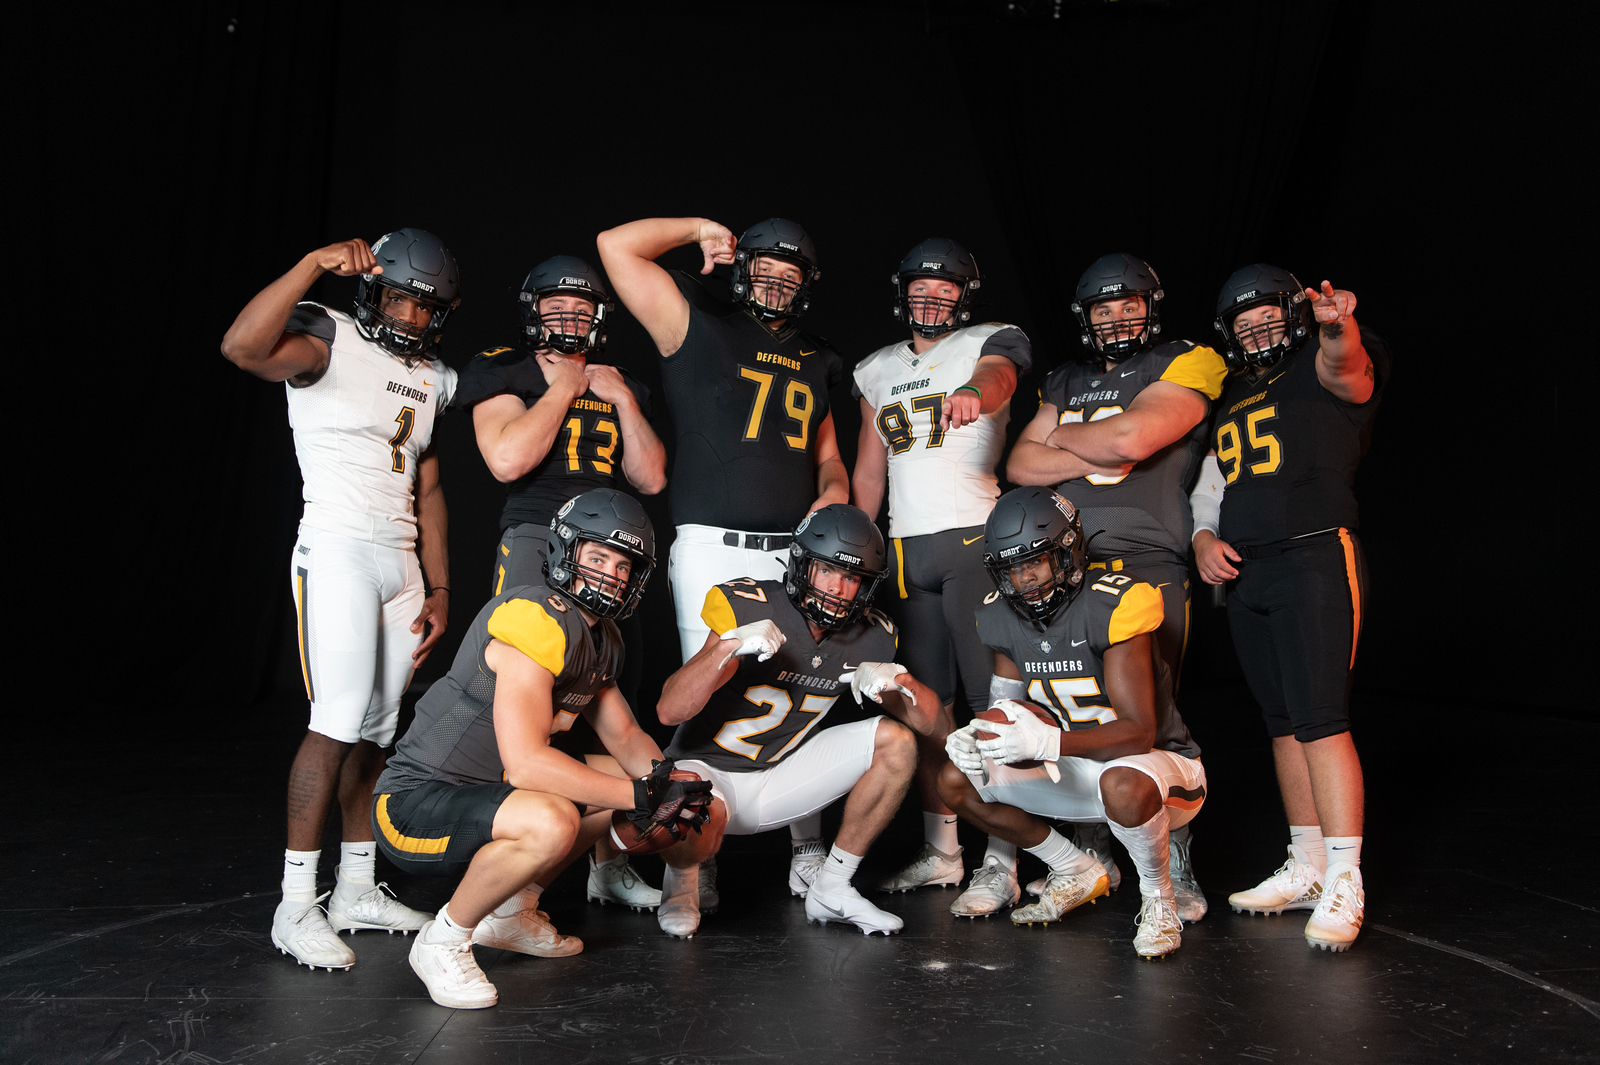 Dordt football players flexing and posing for a group picture